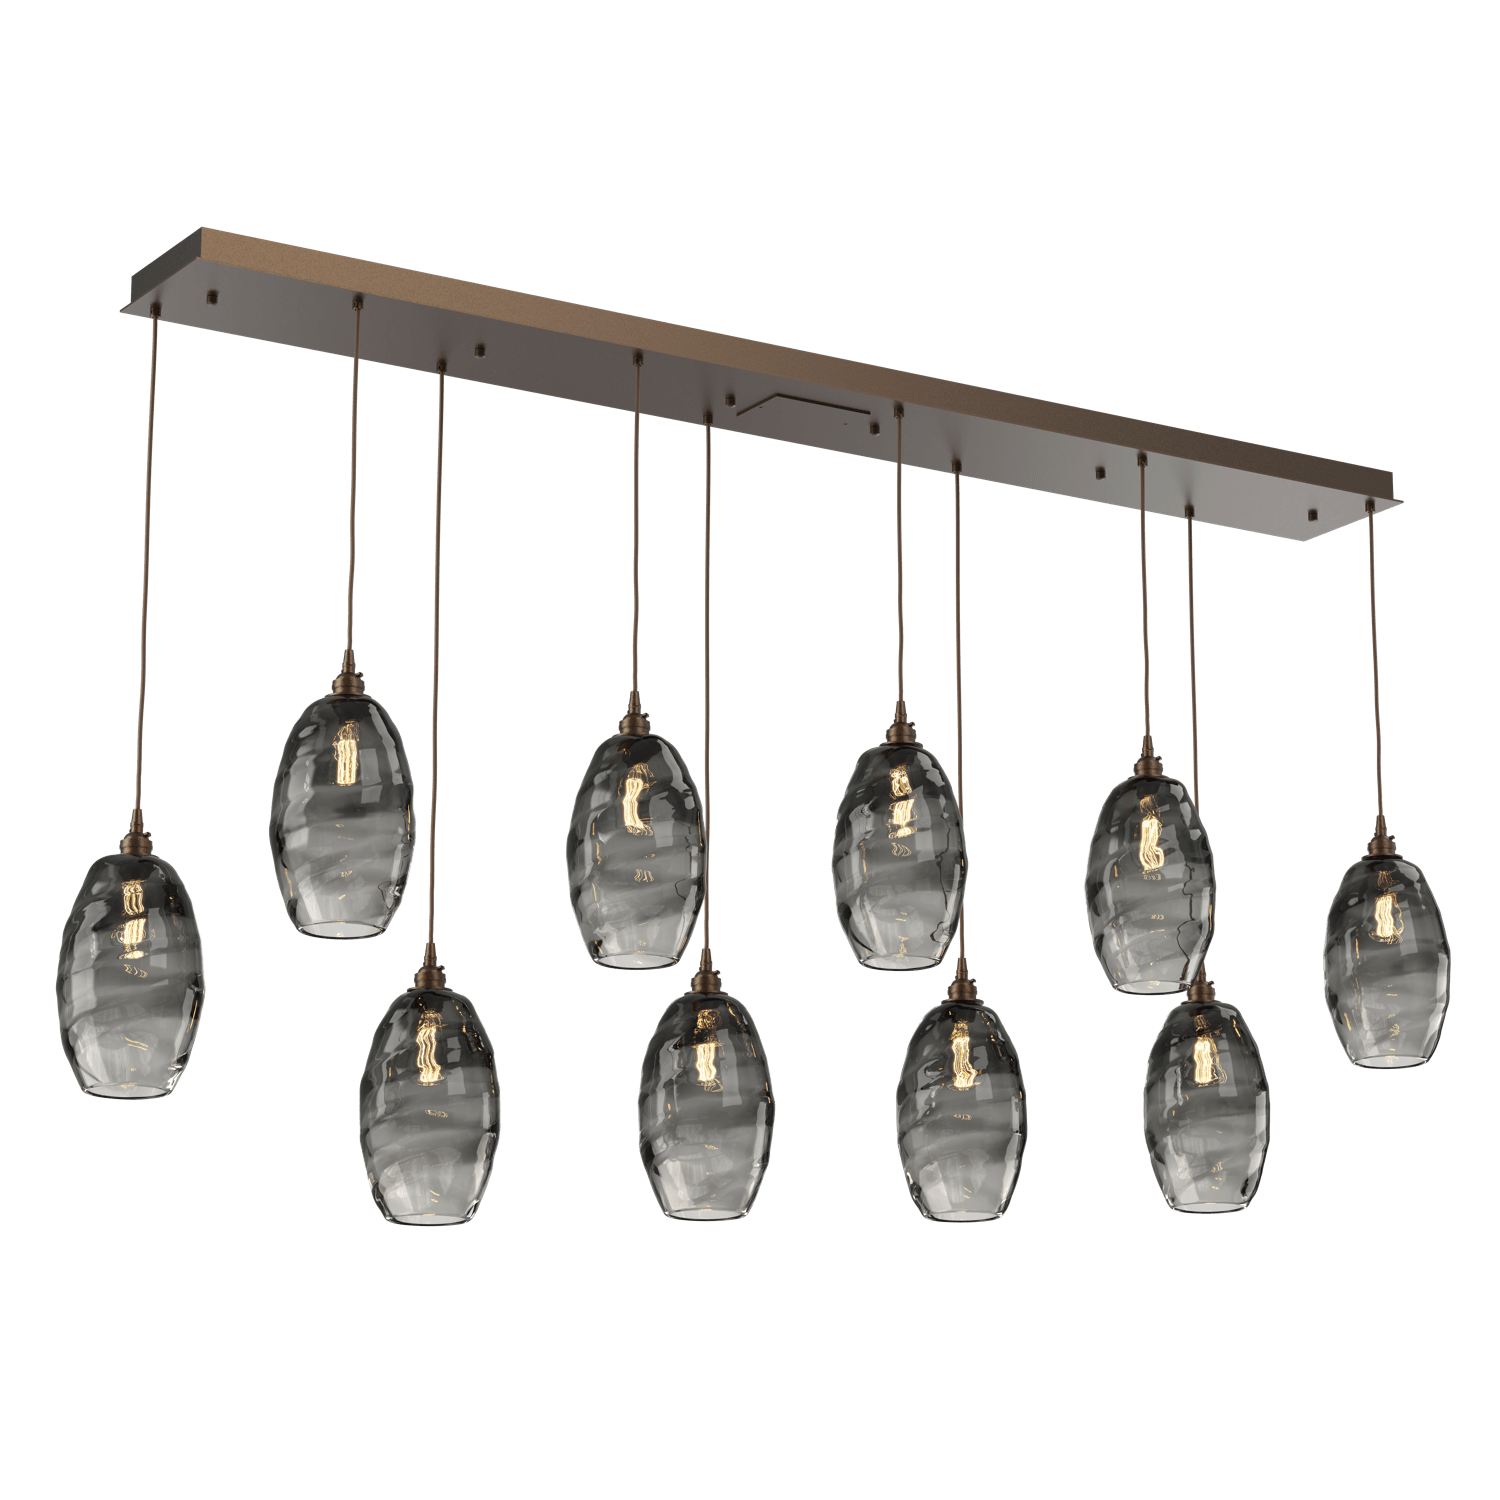 PLB0035-10-FB-OS-Hammerton-Studio-Optic-Blown-Glass-Elisse-10-light-linear-pendant-chandelier-with-flat-bronze-finish-and-optic-smoke-blown-glass-shades-and-incandescent-lamping